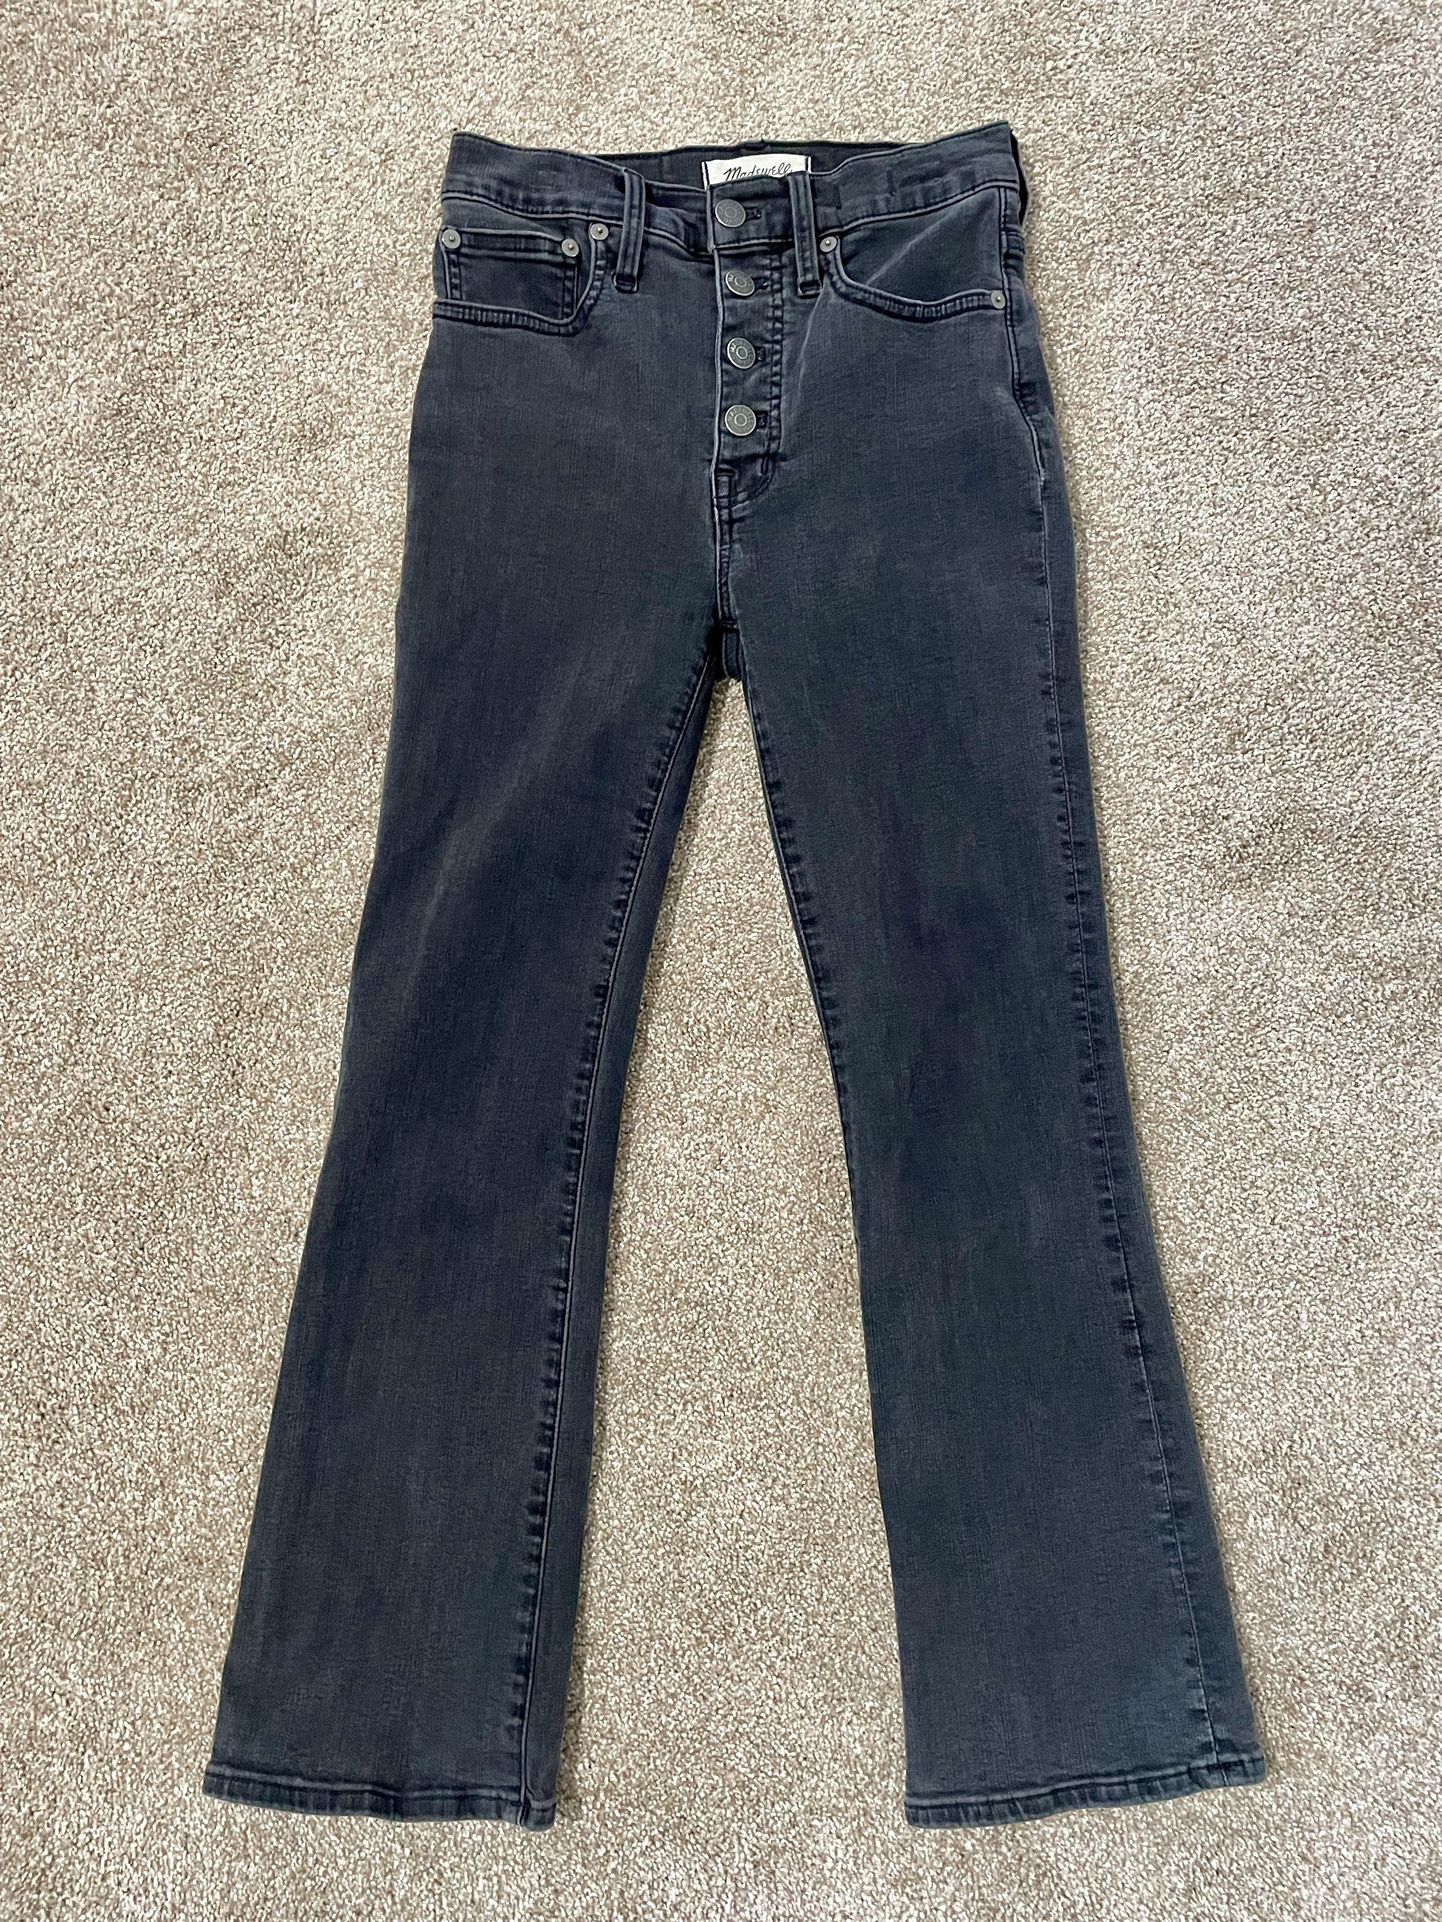 Madewell Cali Demi-Boot Jeans in Bellspring Wash: Button-Front Edition Size: 24